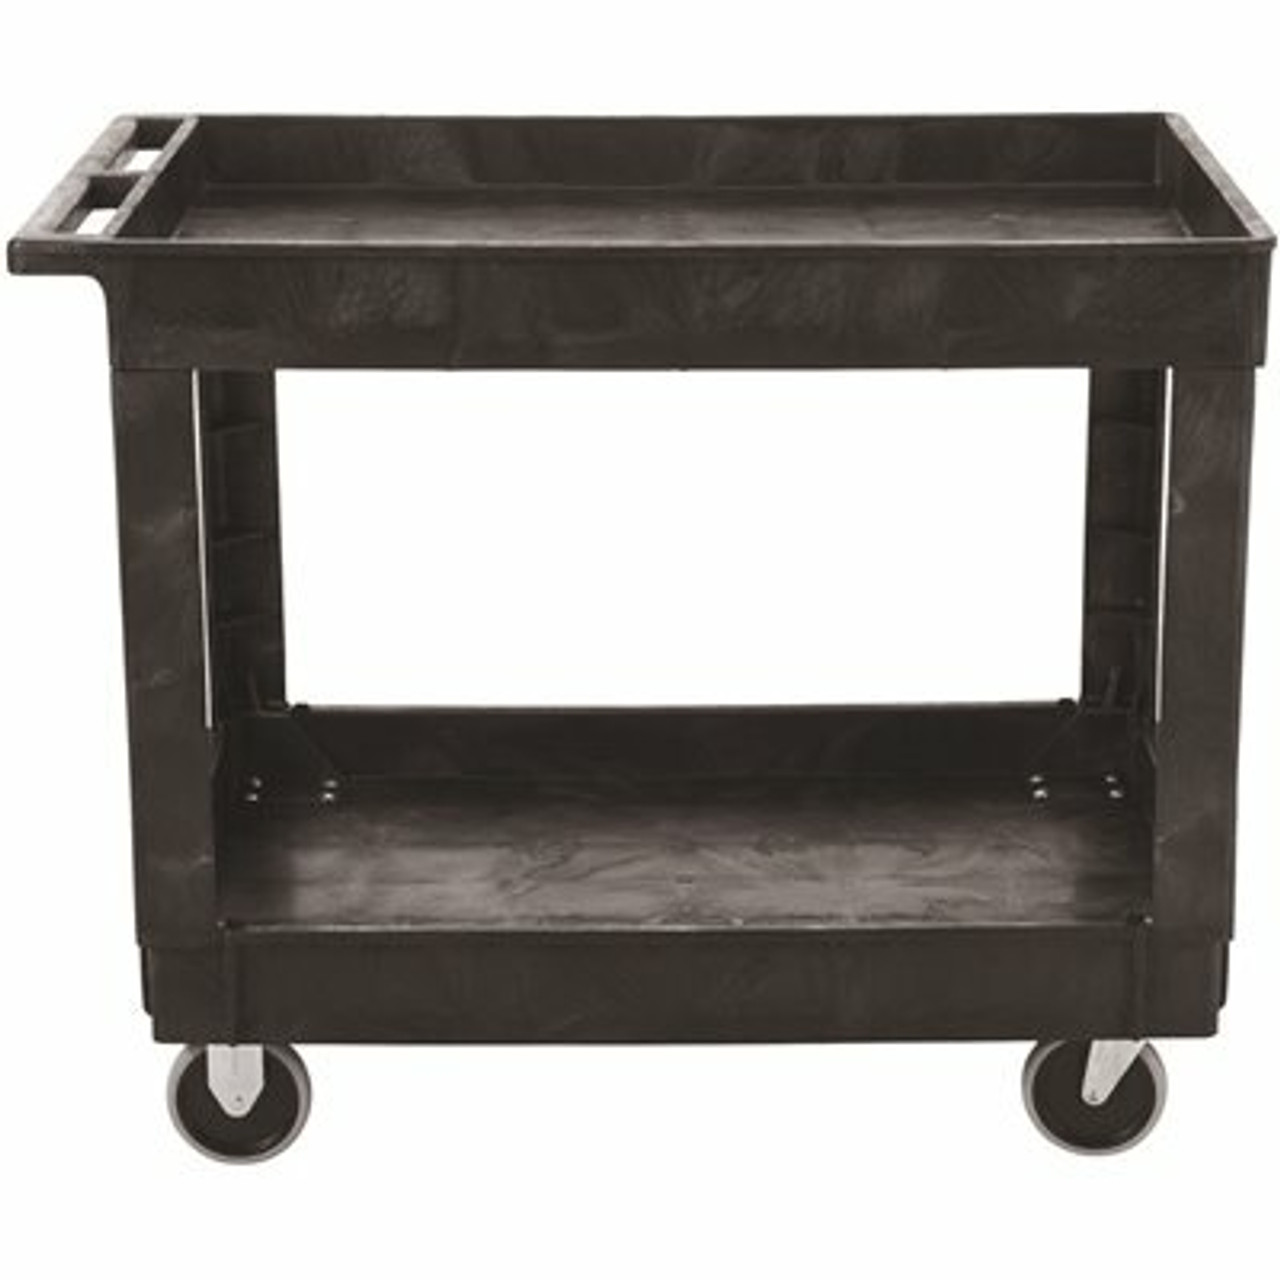 Rubbermaid Commercial Products 40 In. X 24 In. 2-Shelf Heavy-Duty Utility Cart With 4 In. Casters